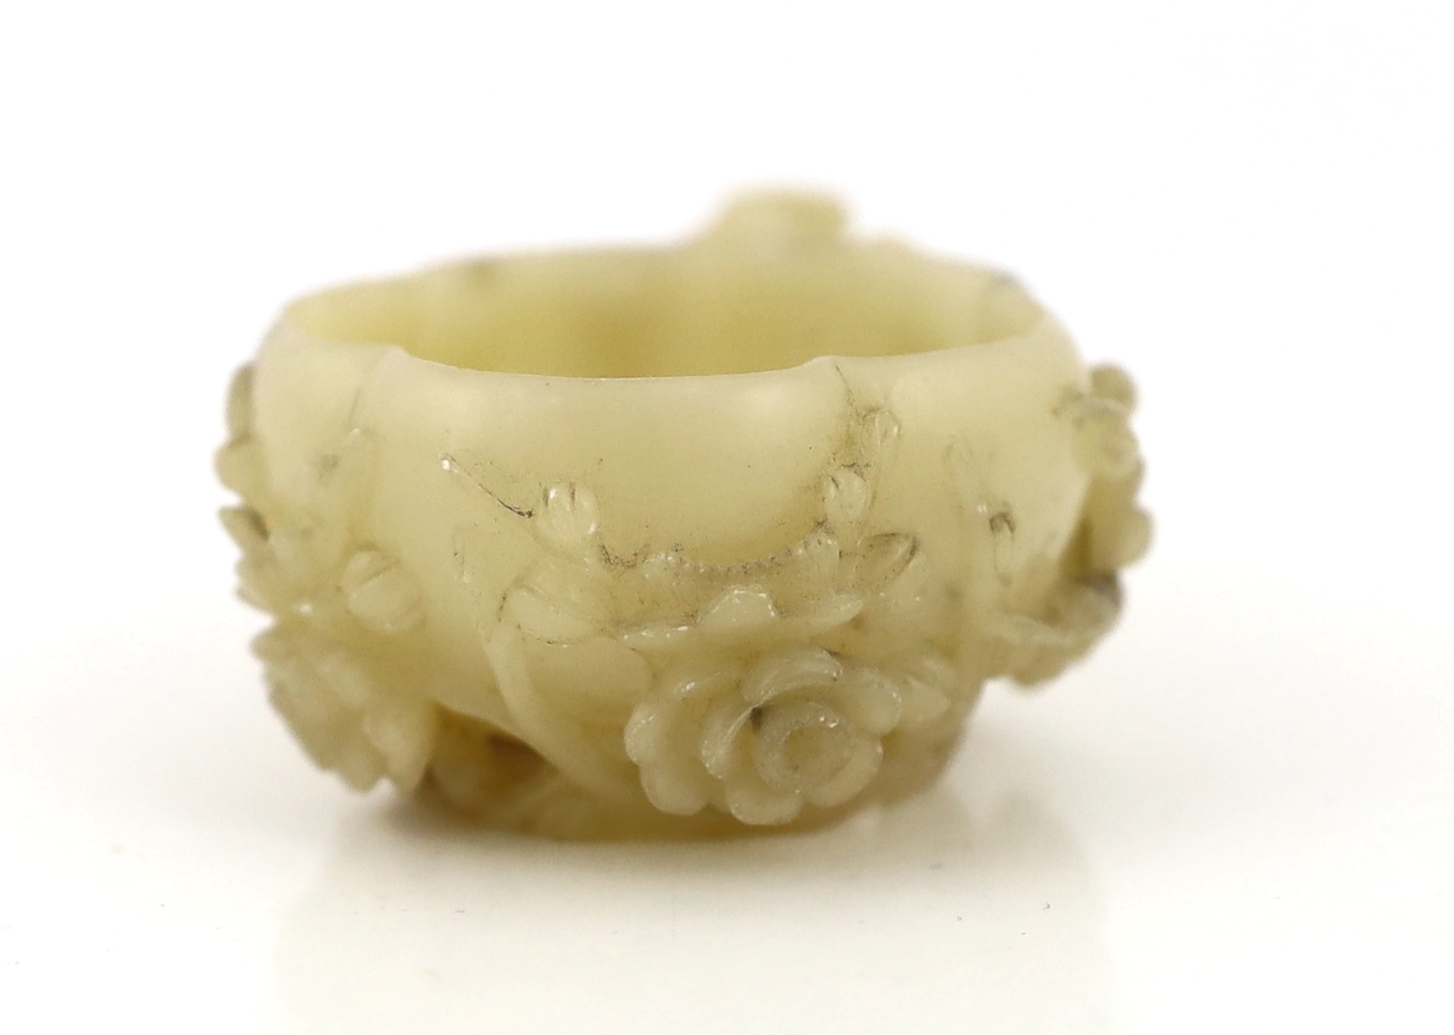 A Chinese creamy white soapstone ‘plum blossom’ cup, 18th/19th century, carved in high relief and open work with prunus branches and blossom, the stone of creamy white tone with some pale russet inclusions, 7.4cm across